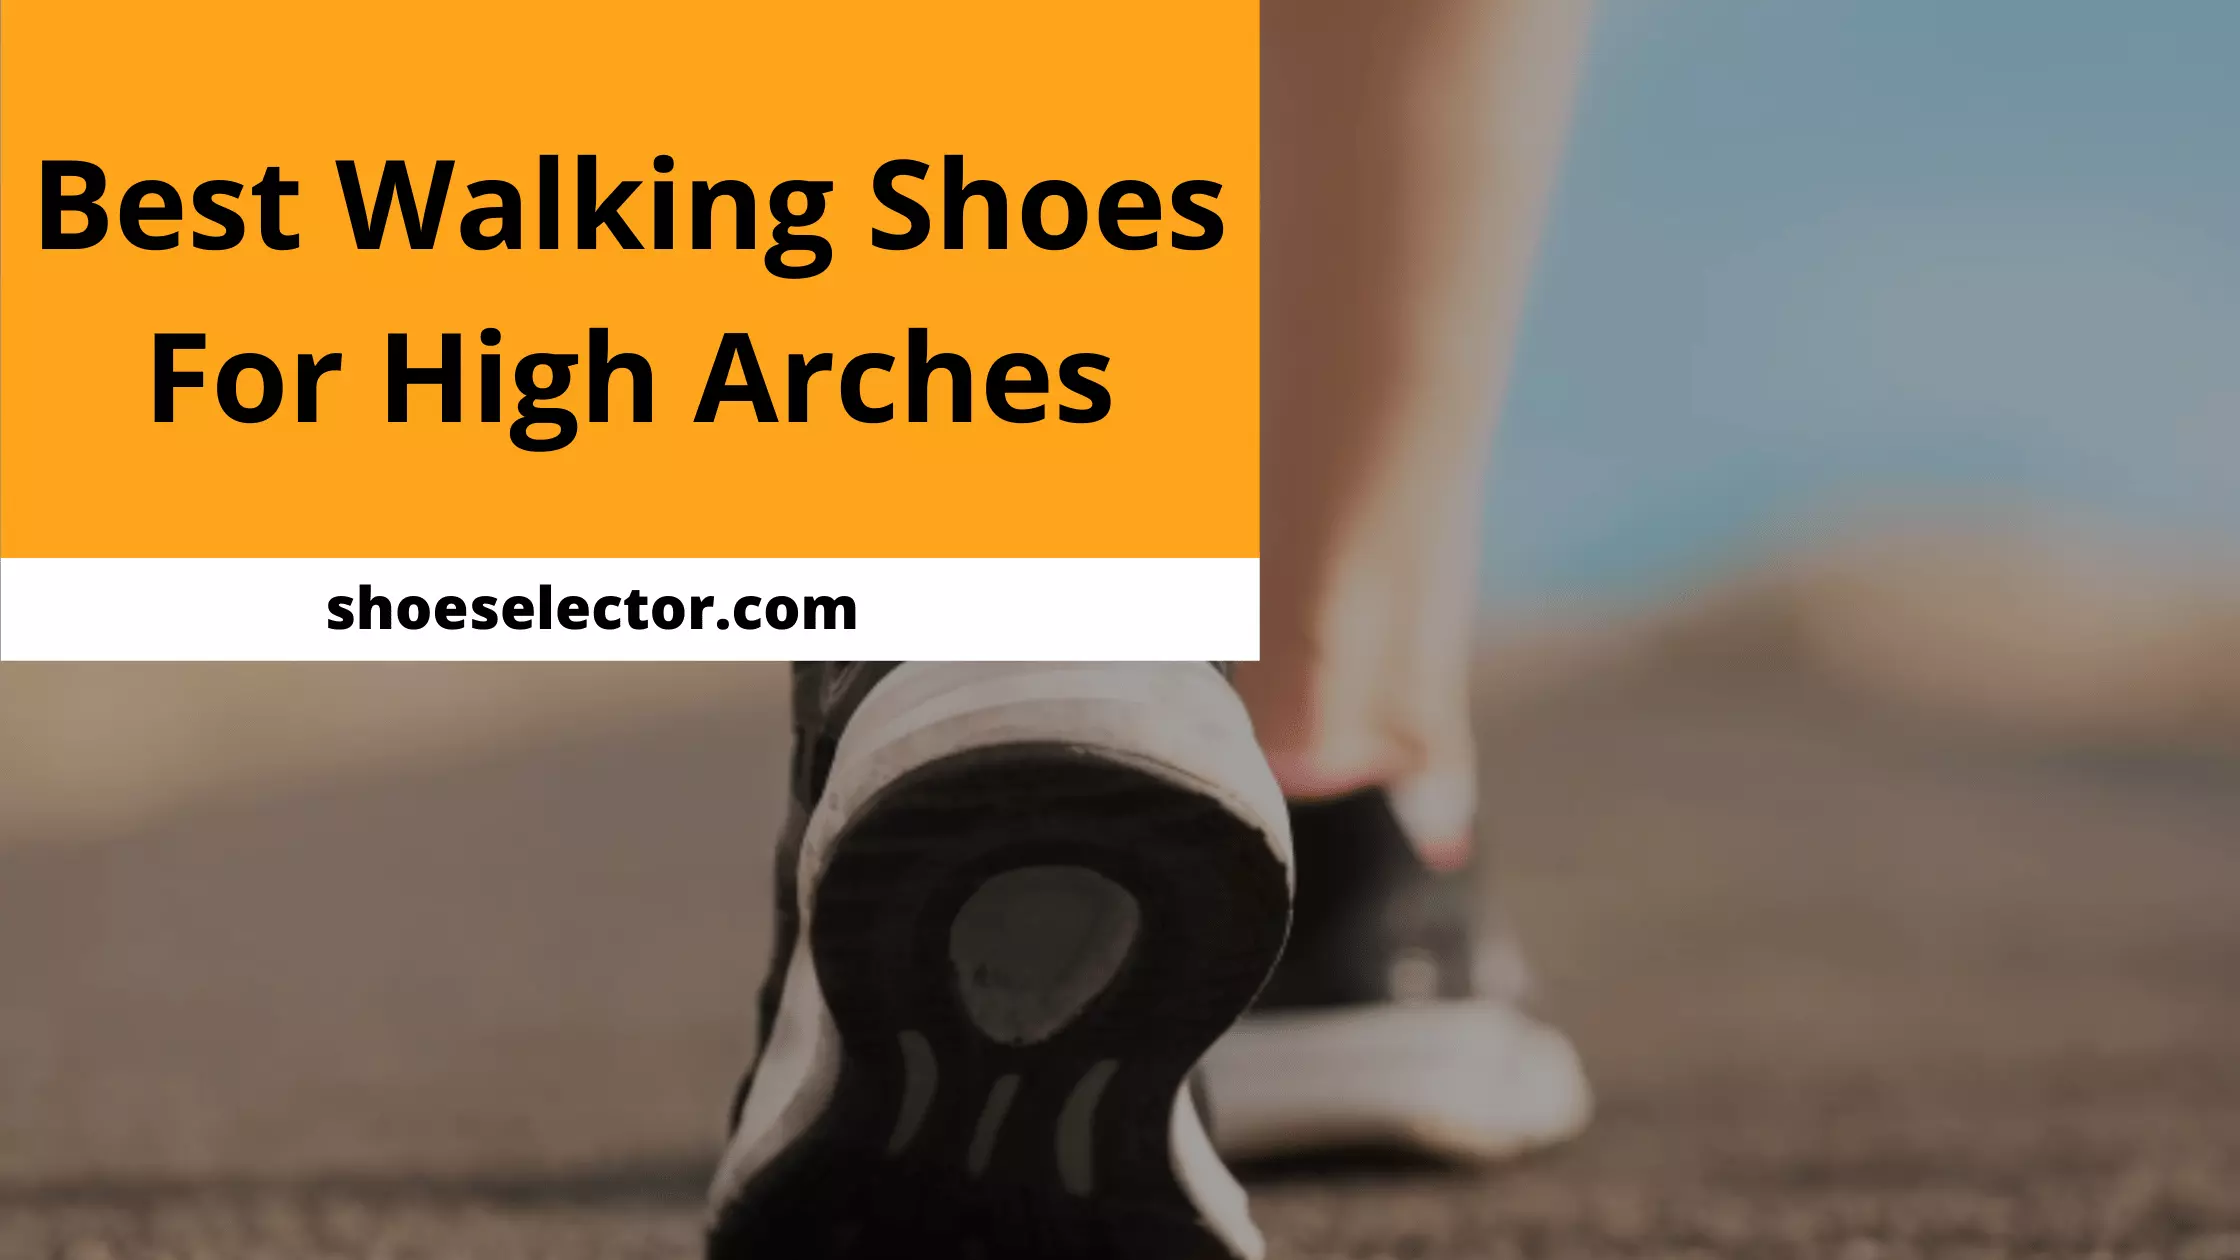 Best Walking Shoes For High Arches - Complete Buying Guides